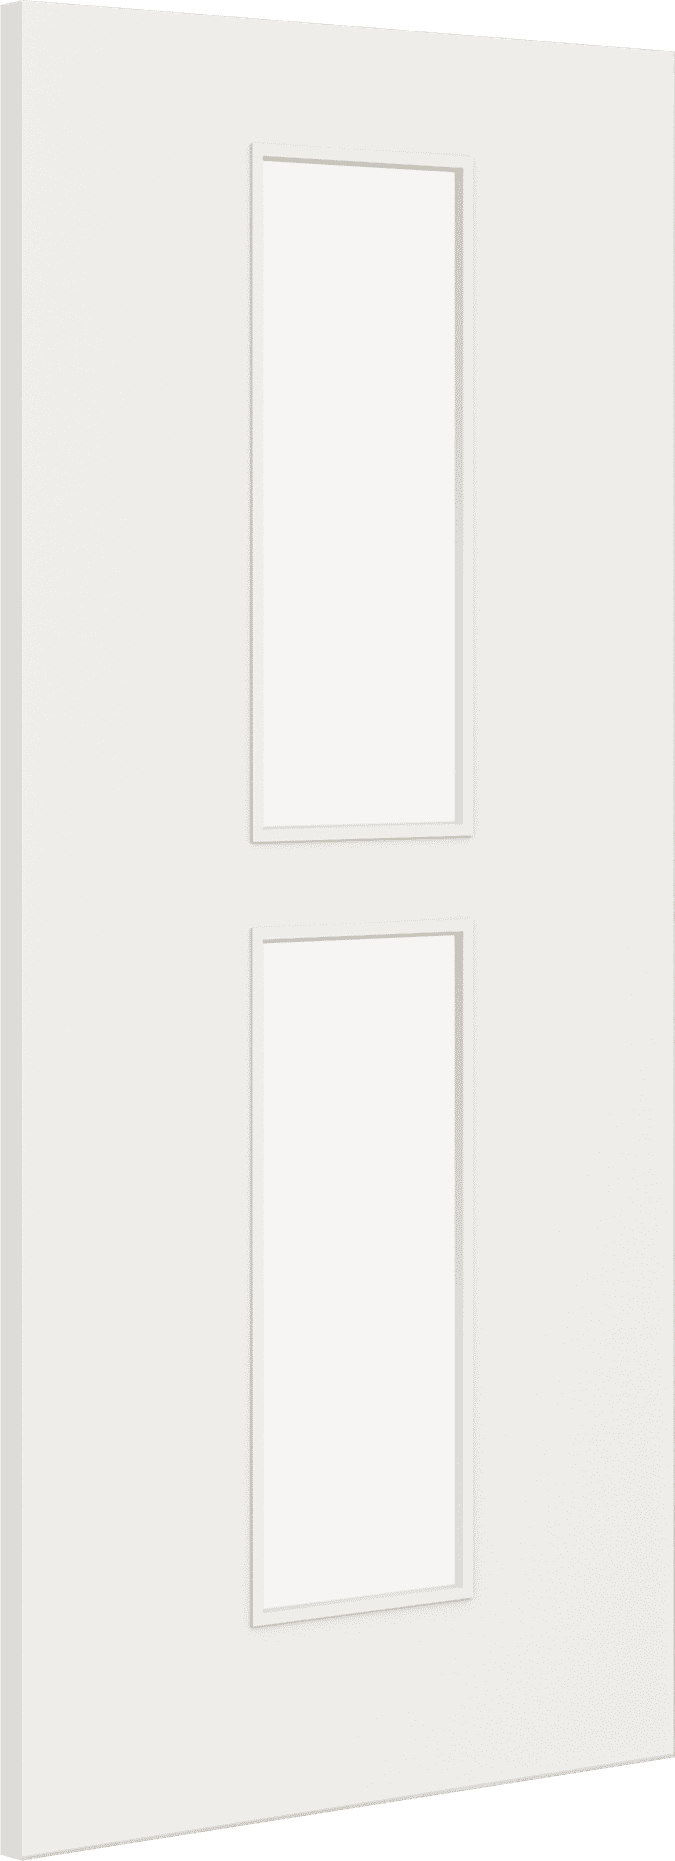 2040mm x 726mm x 44mm Architectural Paint Grade White 12 Clear Glazed Fire Door Blank